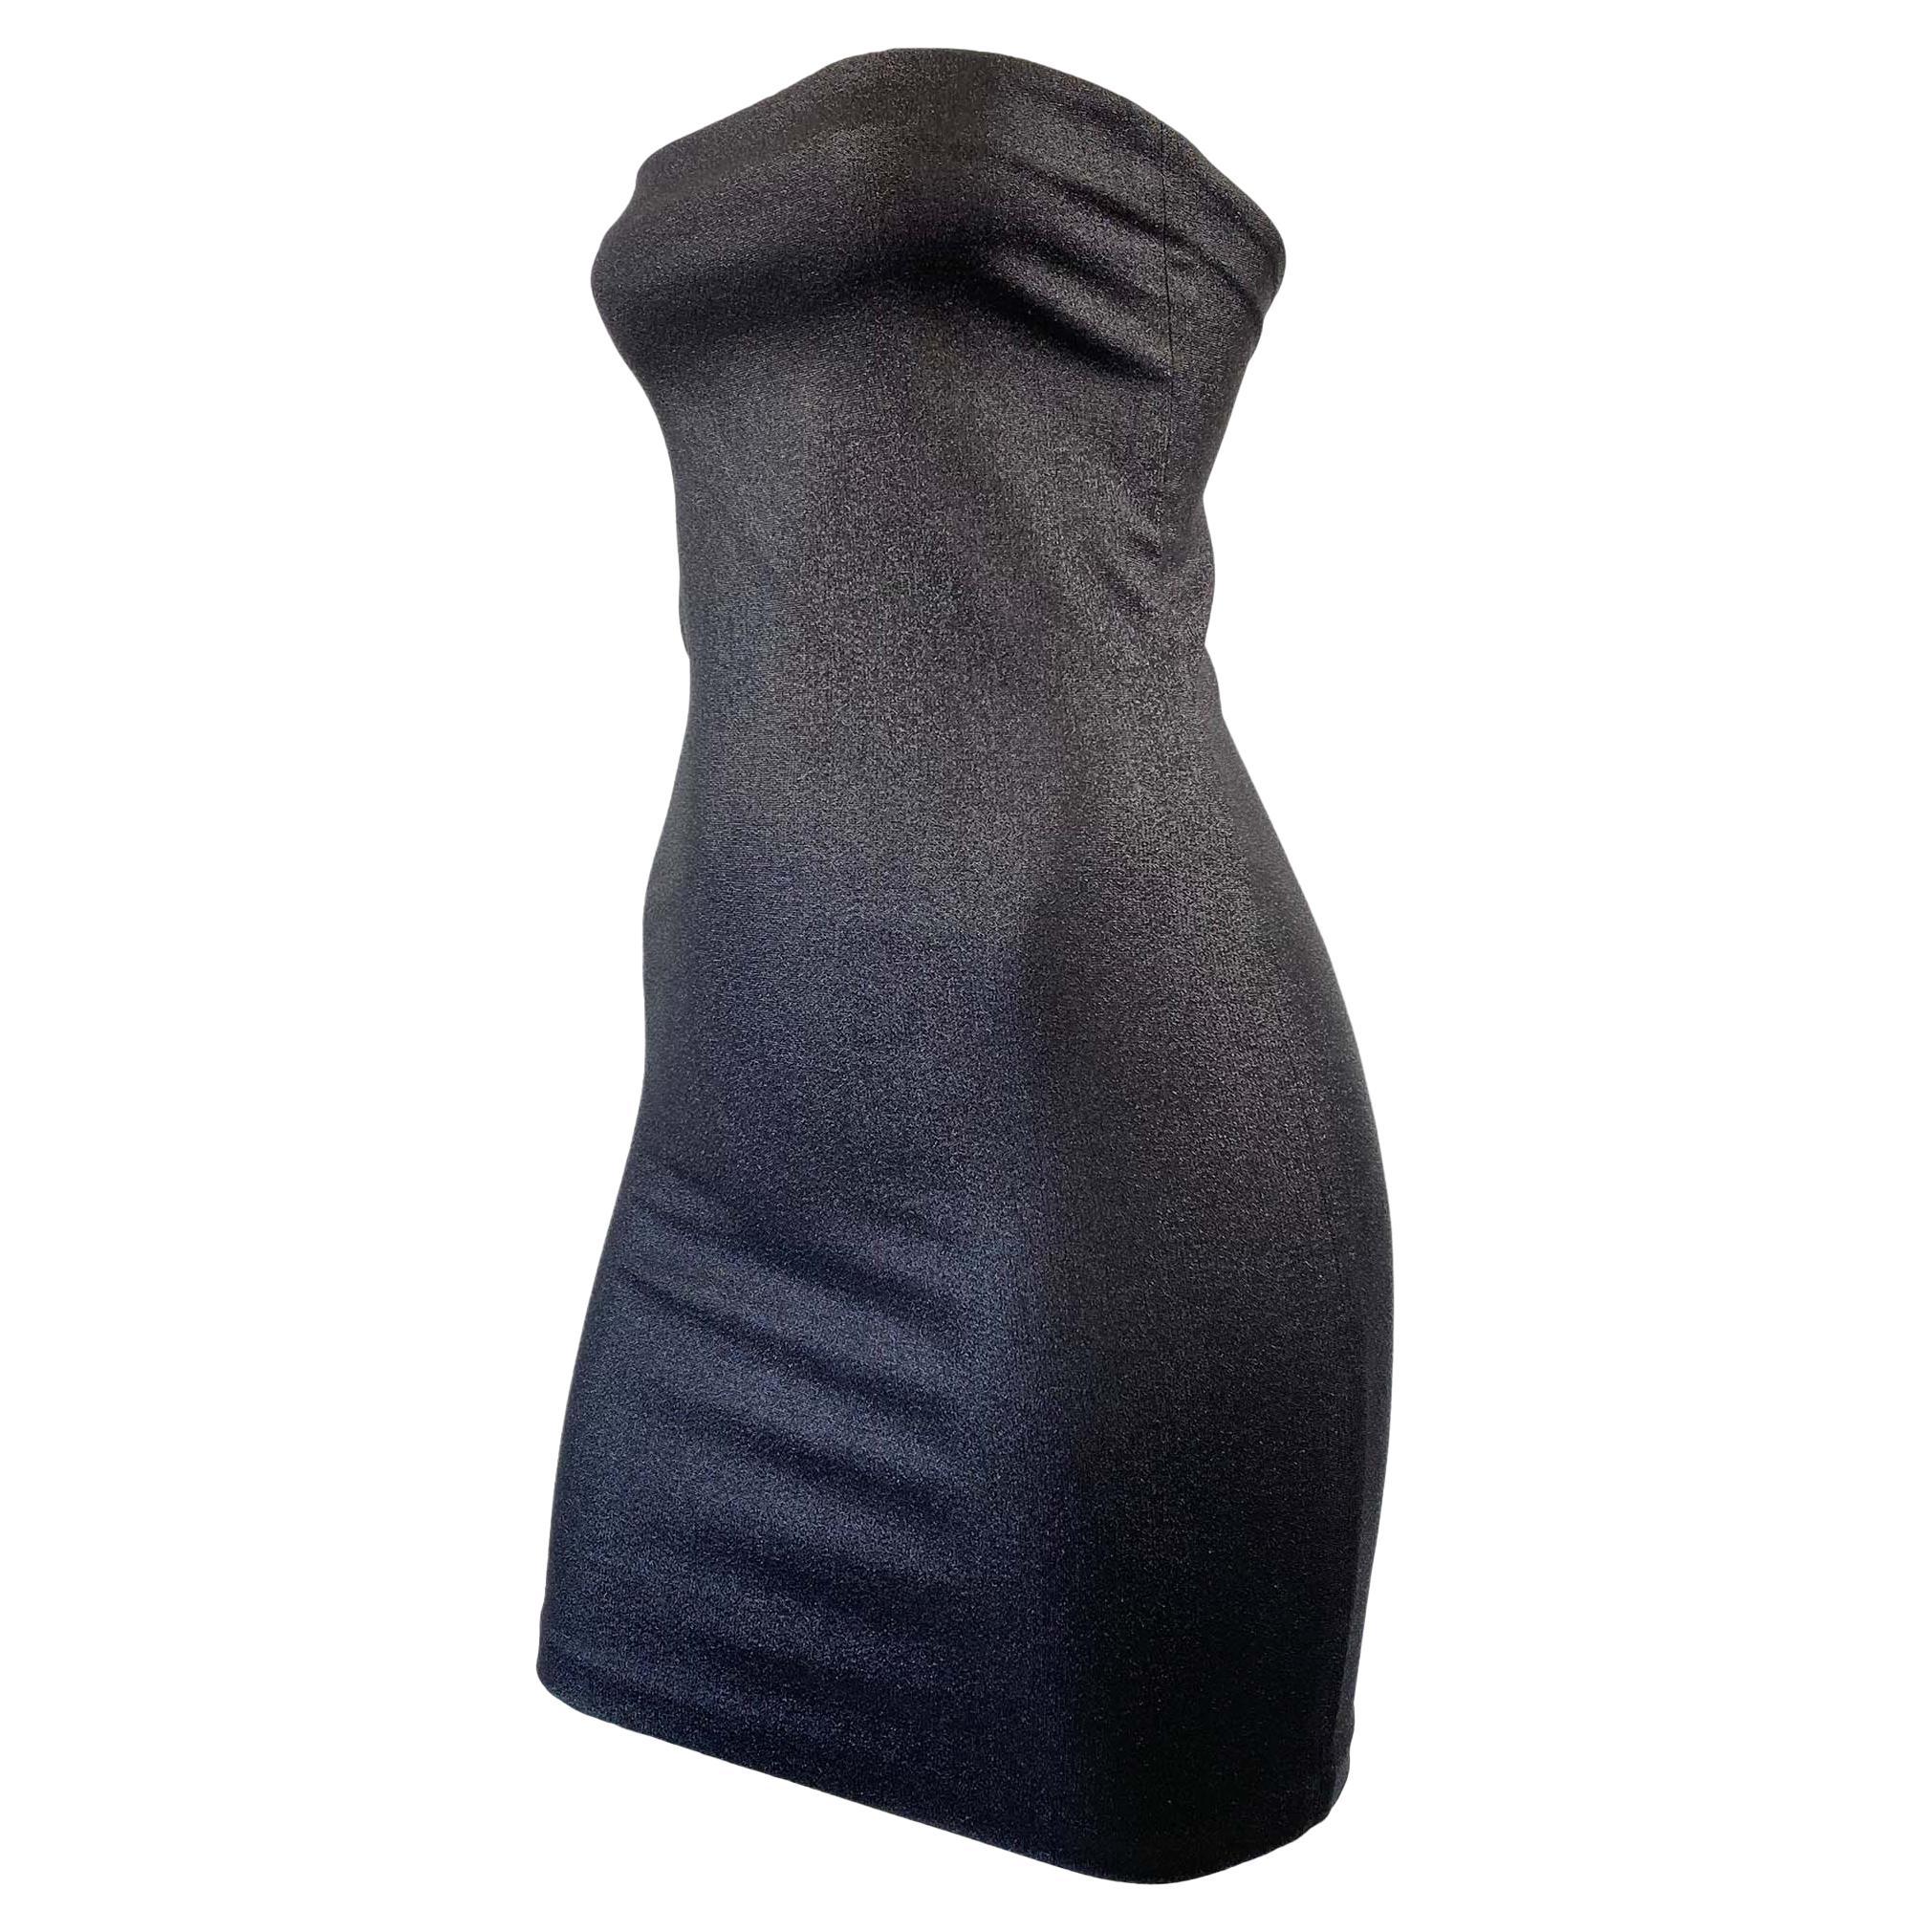 S/S 1997 Gucci by Tom Ford Black Grey Metallic Mini Stretch Strapless Tube Dress For Sale